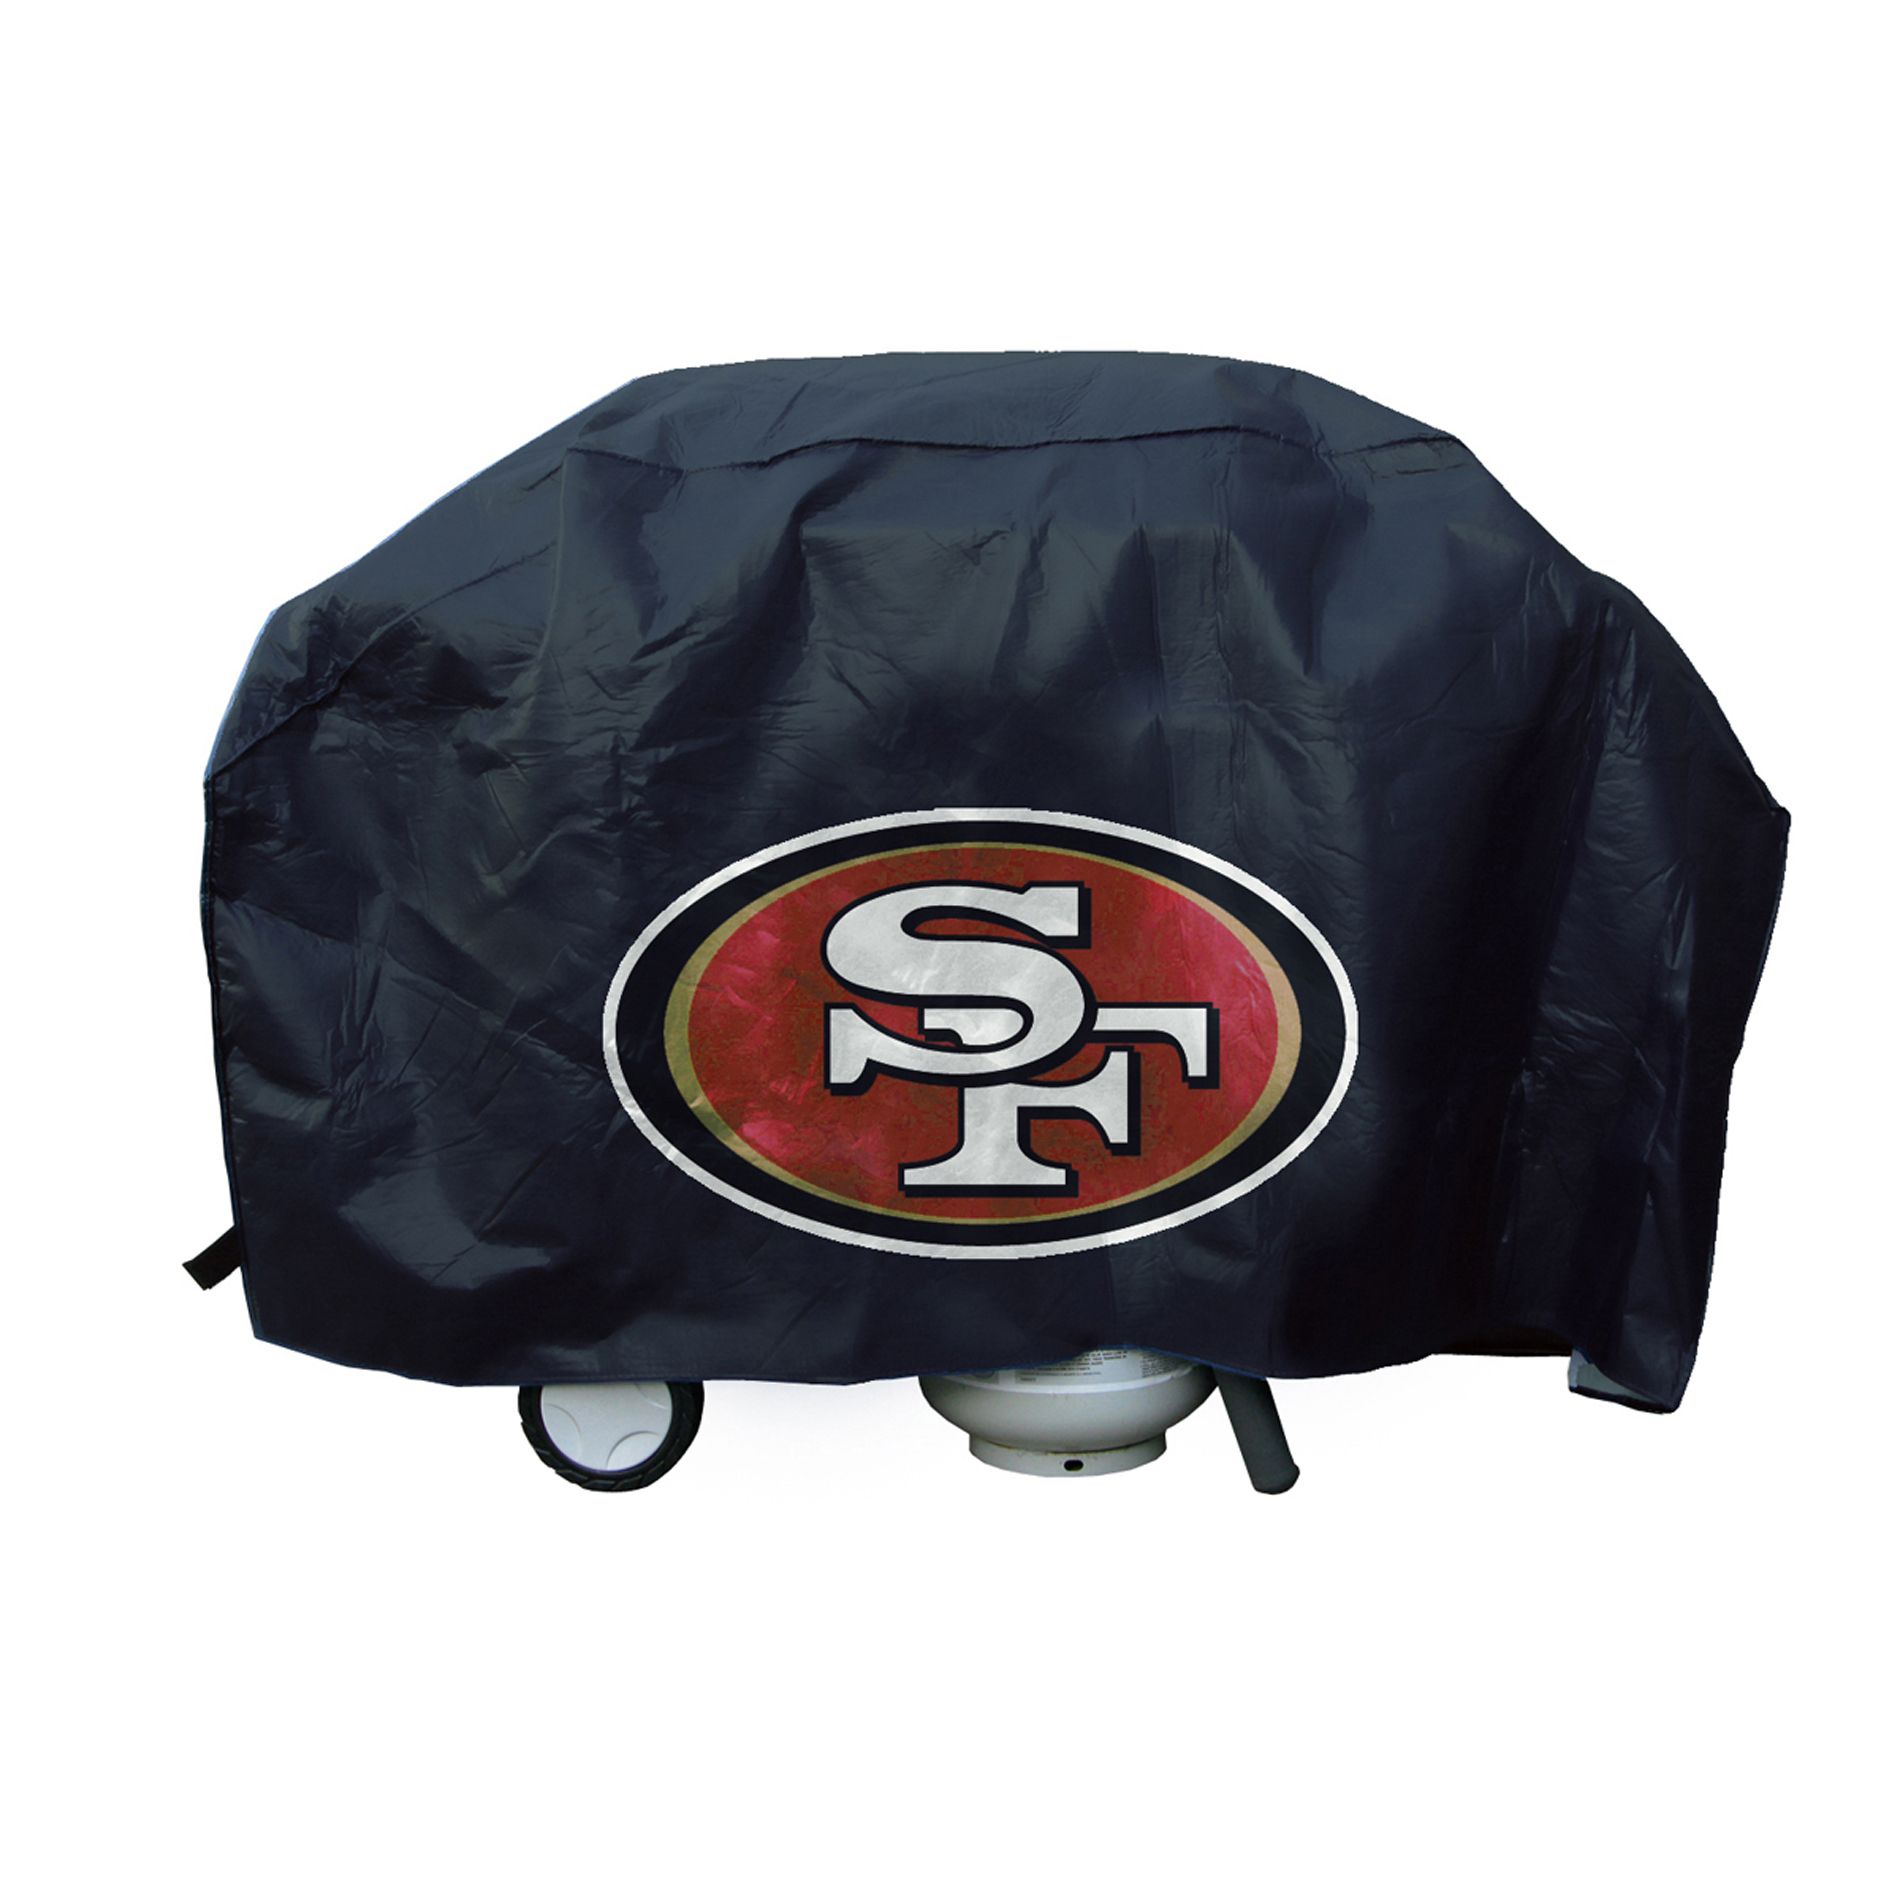 Rico San Francisco 49ers Deluxe Grill Cover